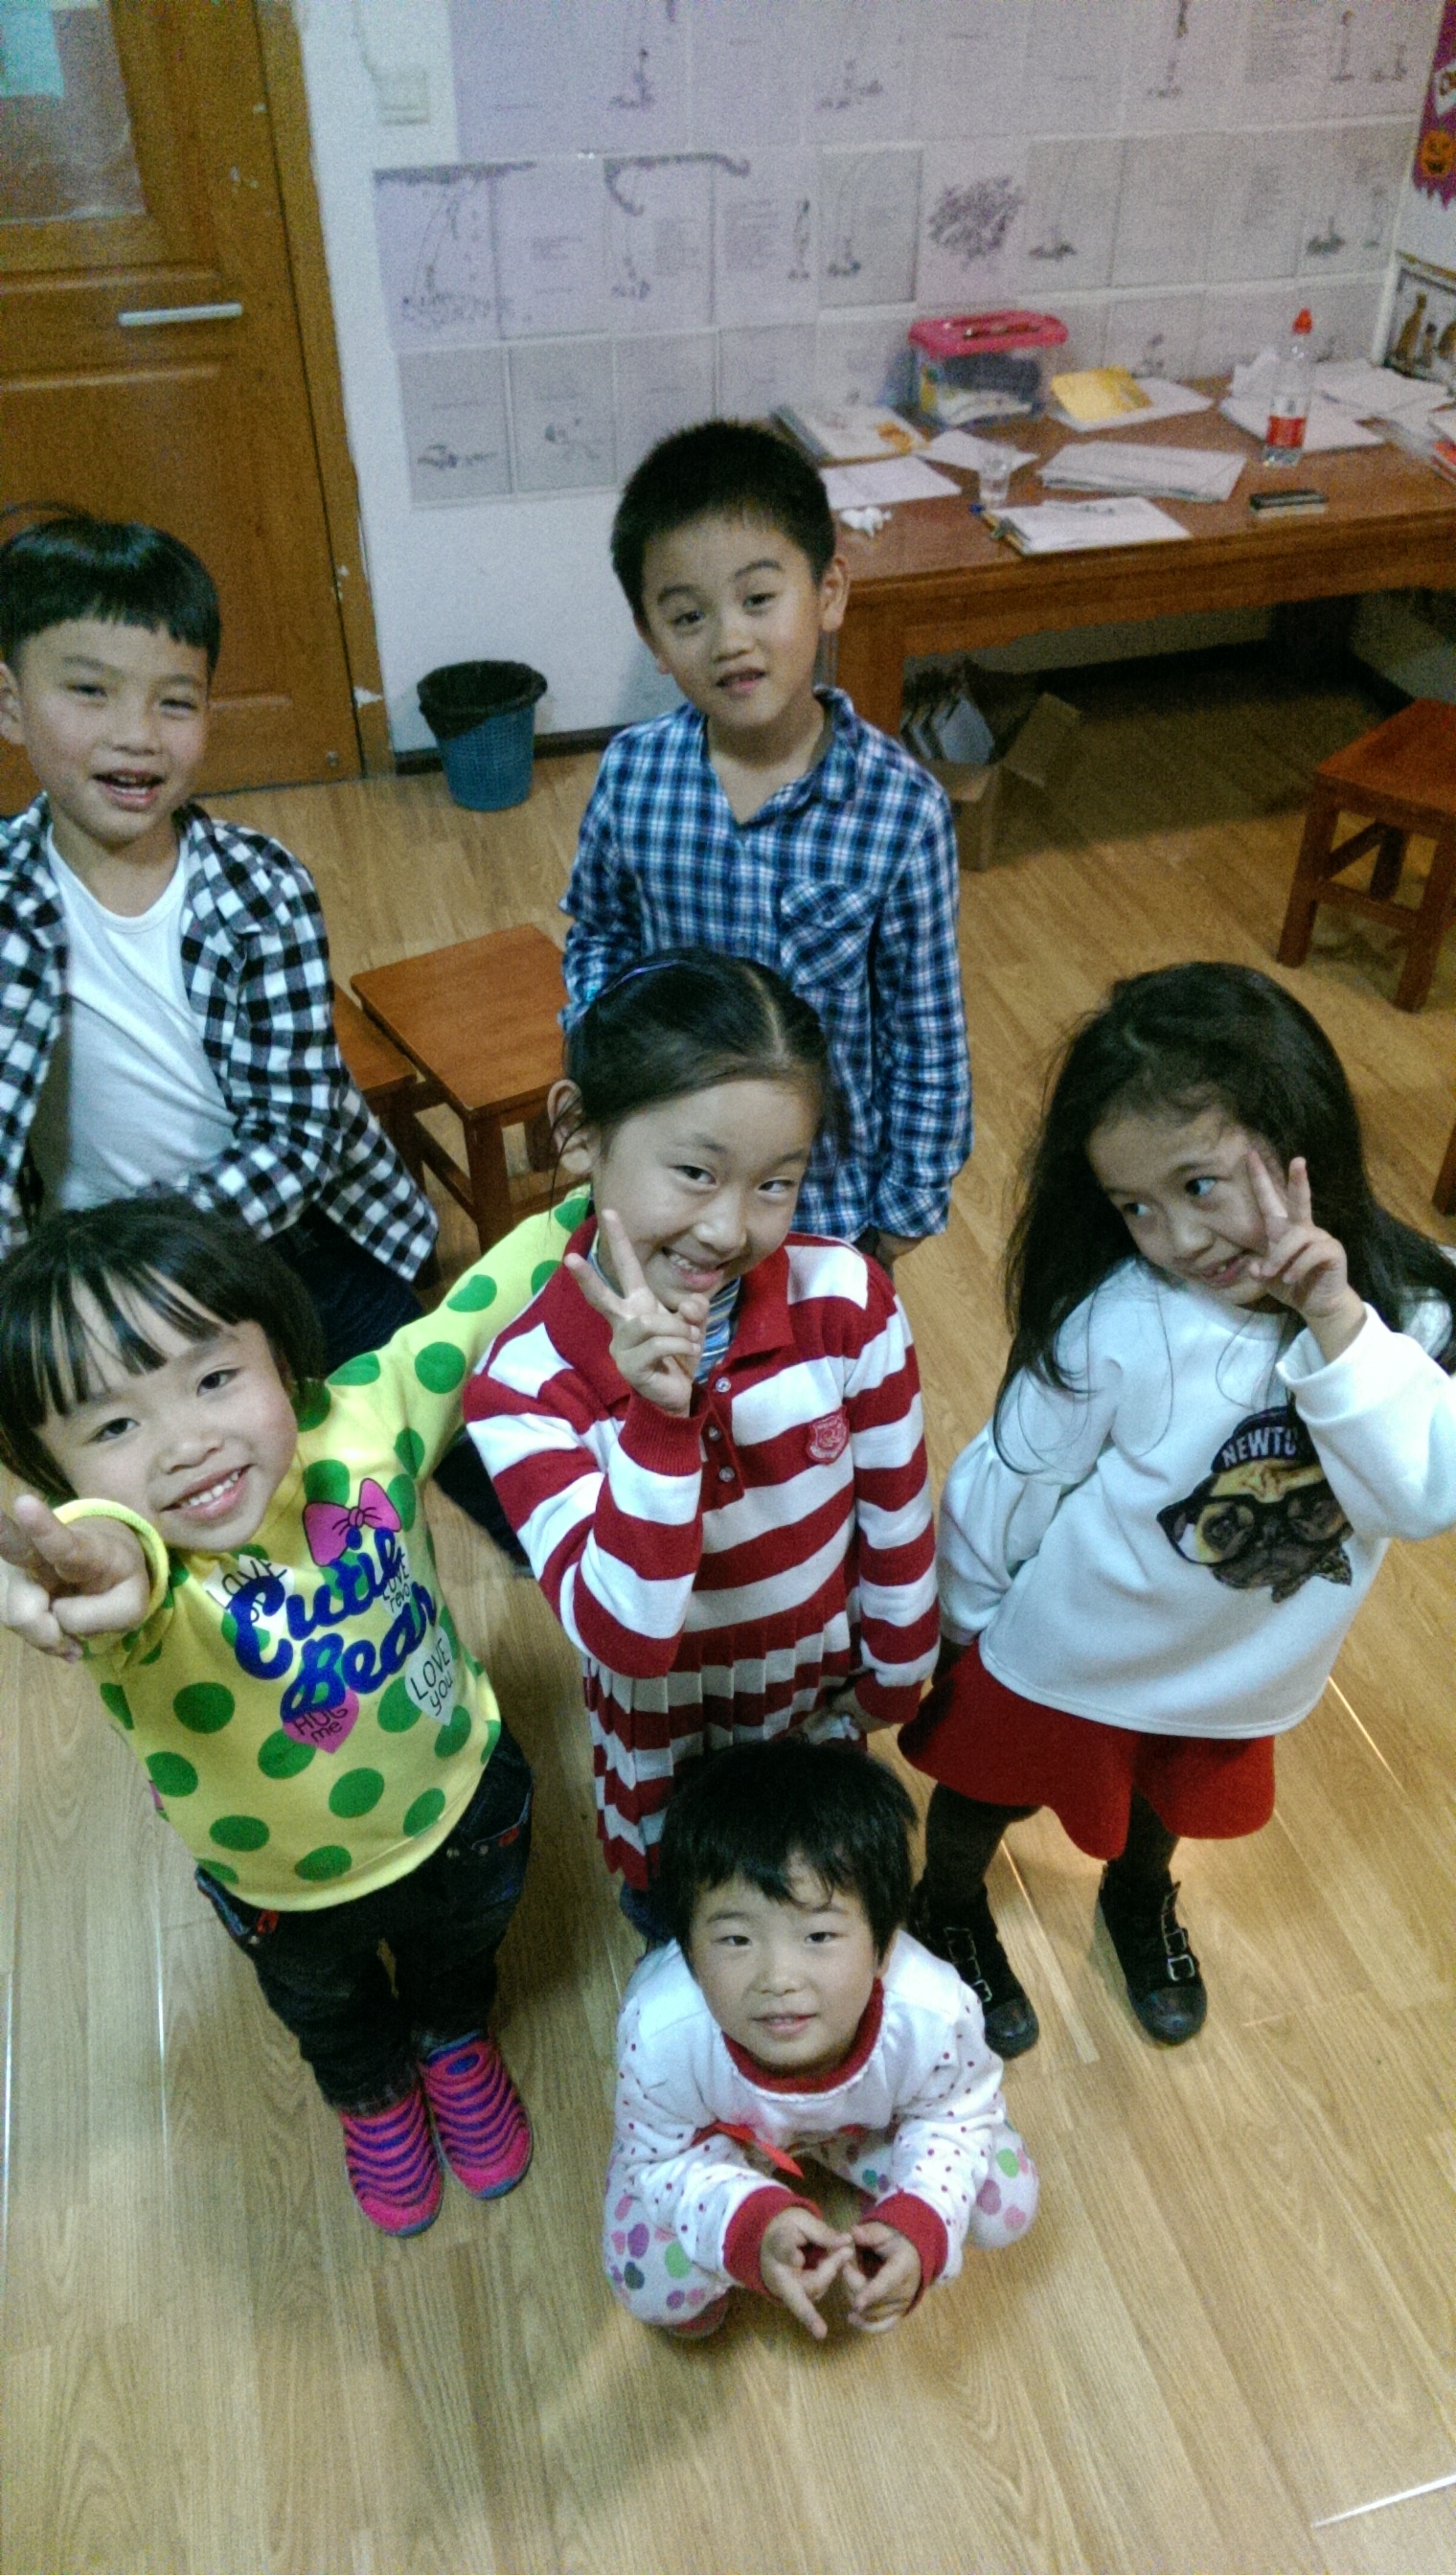 This little monkeys are my heroes :)  Not only are they a tonne of fun, but they are incredibly sweet too.  I went into a coughing fit today in class and little Sufei (the cutie in the middle) came over and put her hand on my arm and asked "Marie, are you ok?".  Teaching is just so.......rewarding!!!